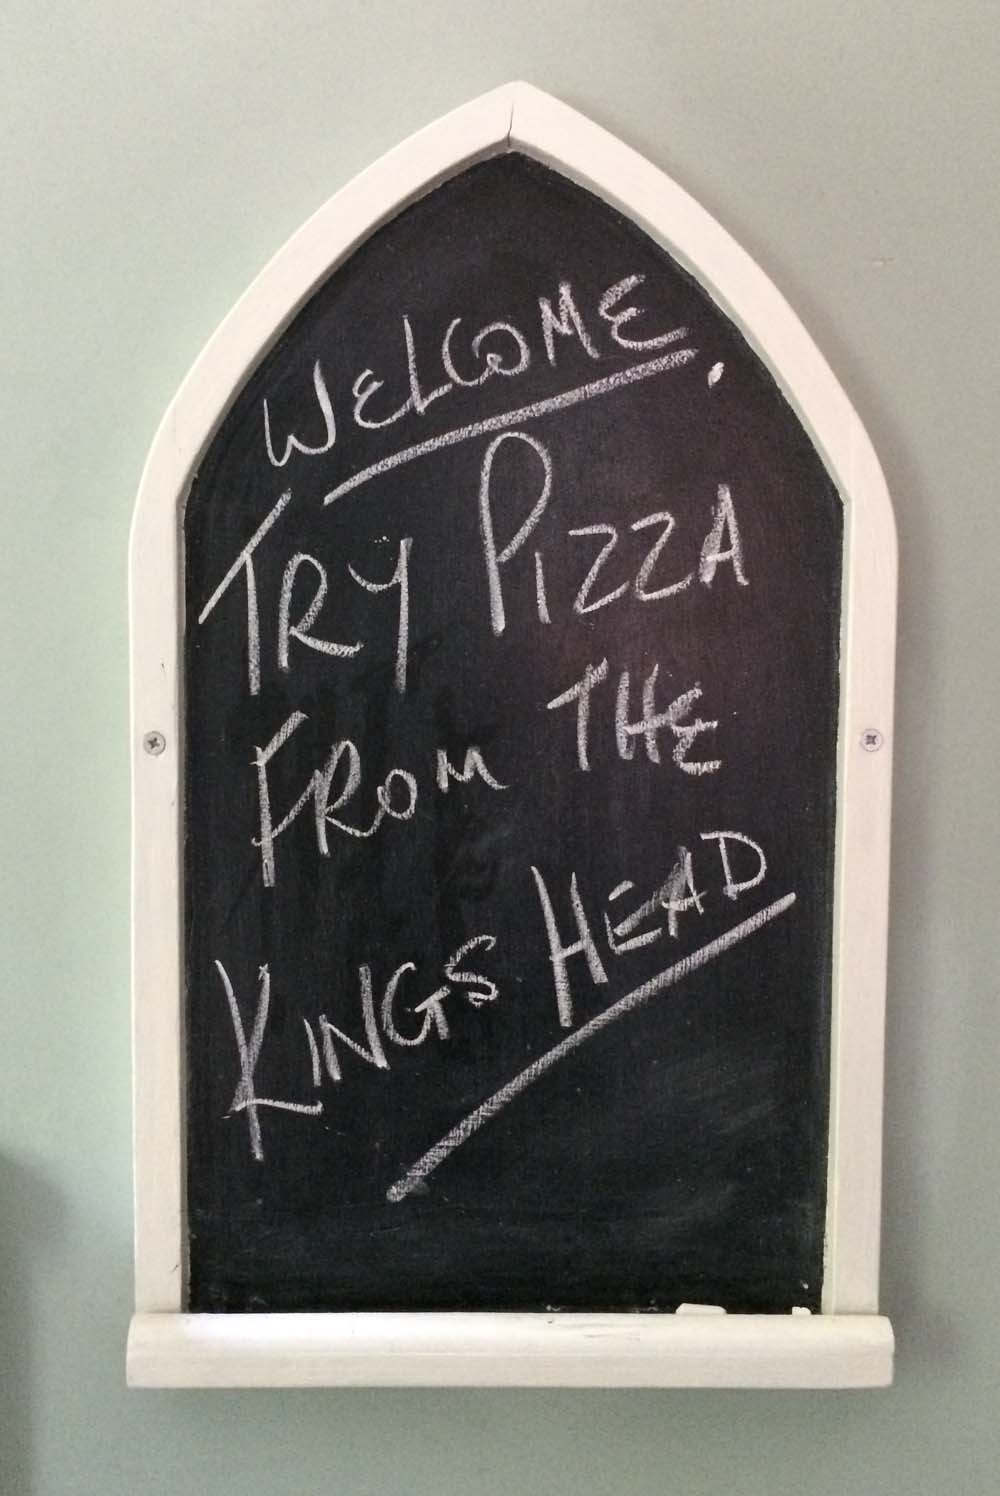 ok! i did go to the king's head but only discovered where  the pizza booth was the next day. i ended up dining at the george